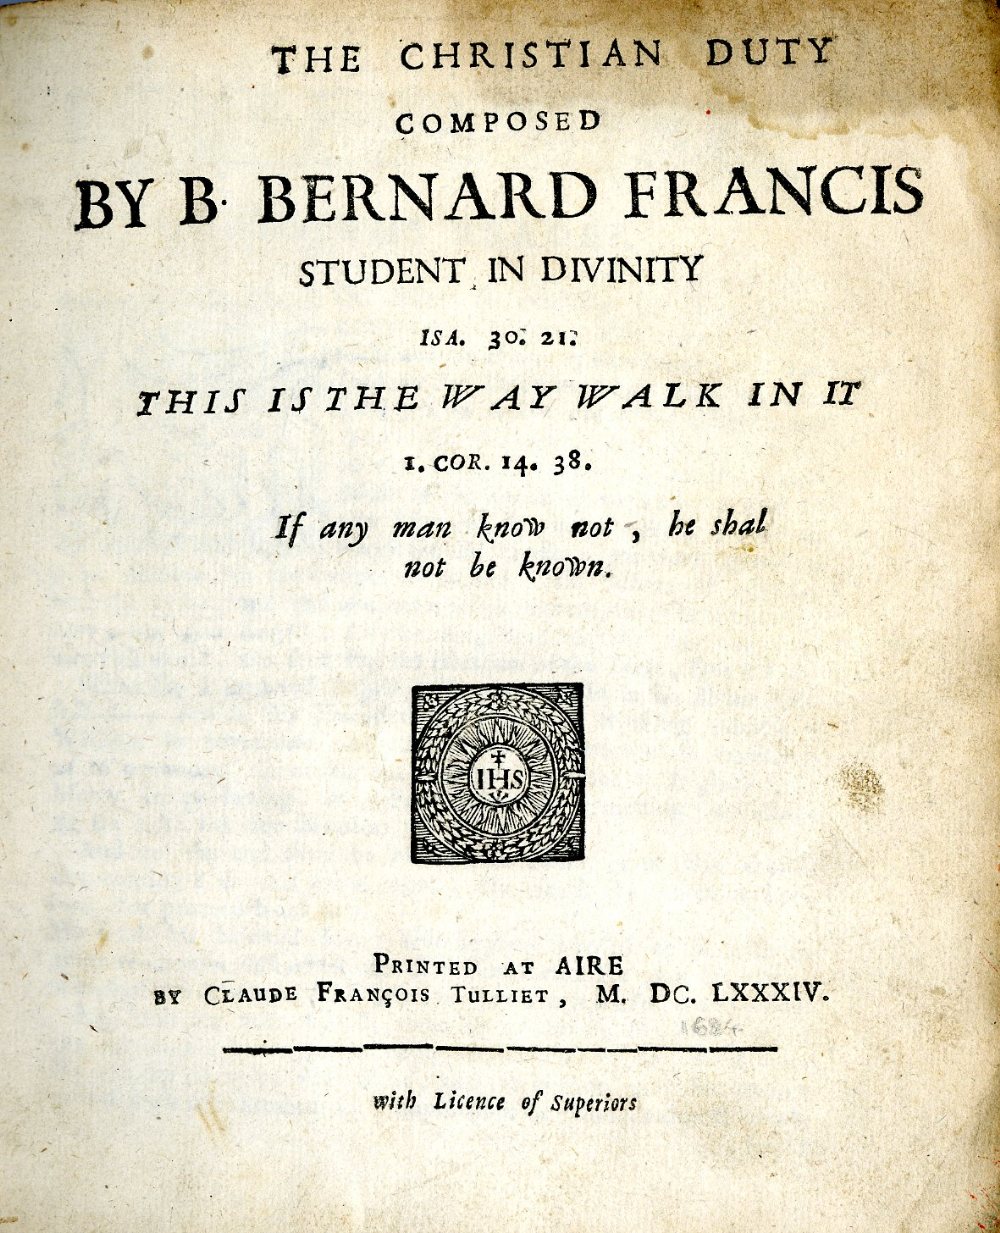 Francis (B. Bernard) Student in Divinity, The Christian Duty, This is the Way, Walk in it.